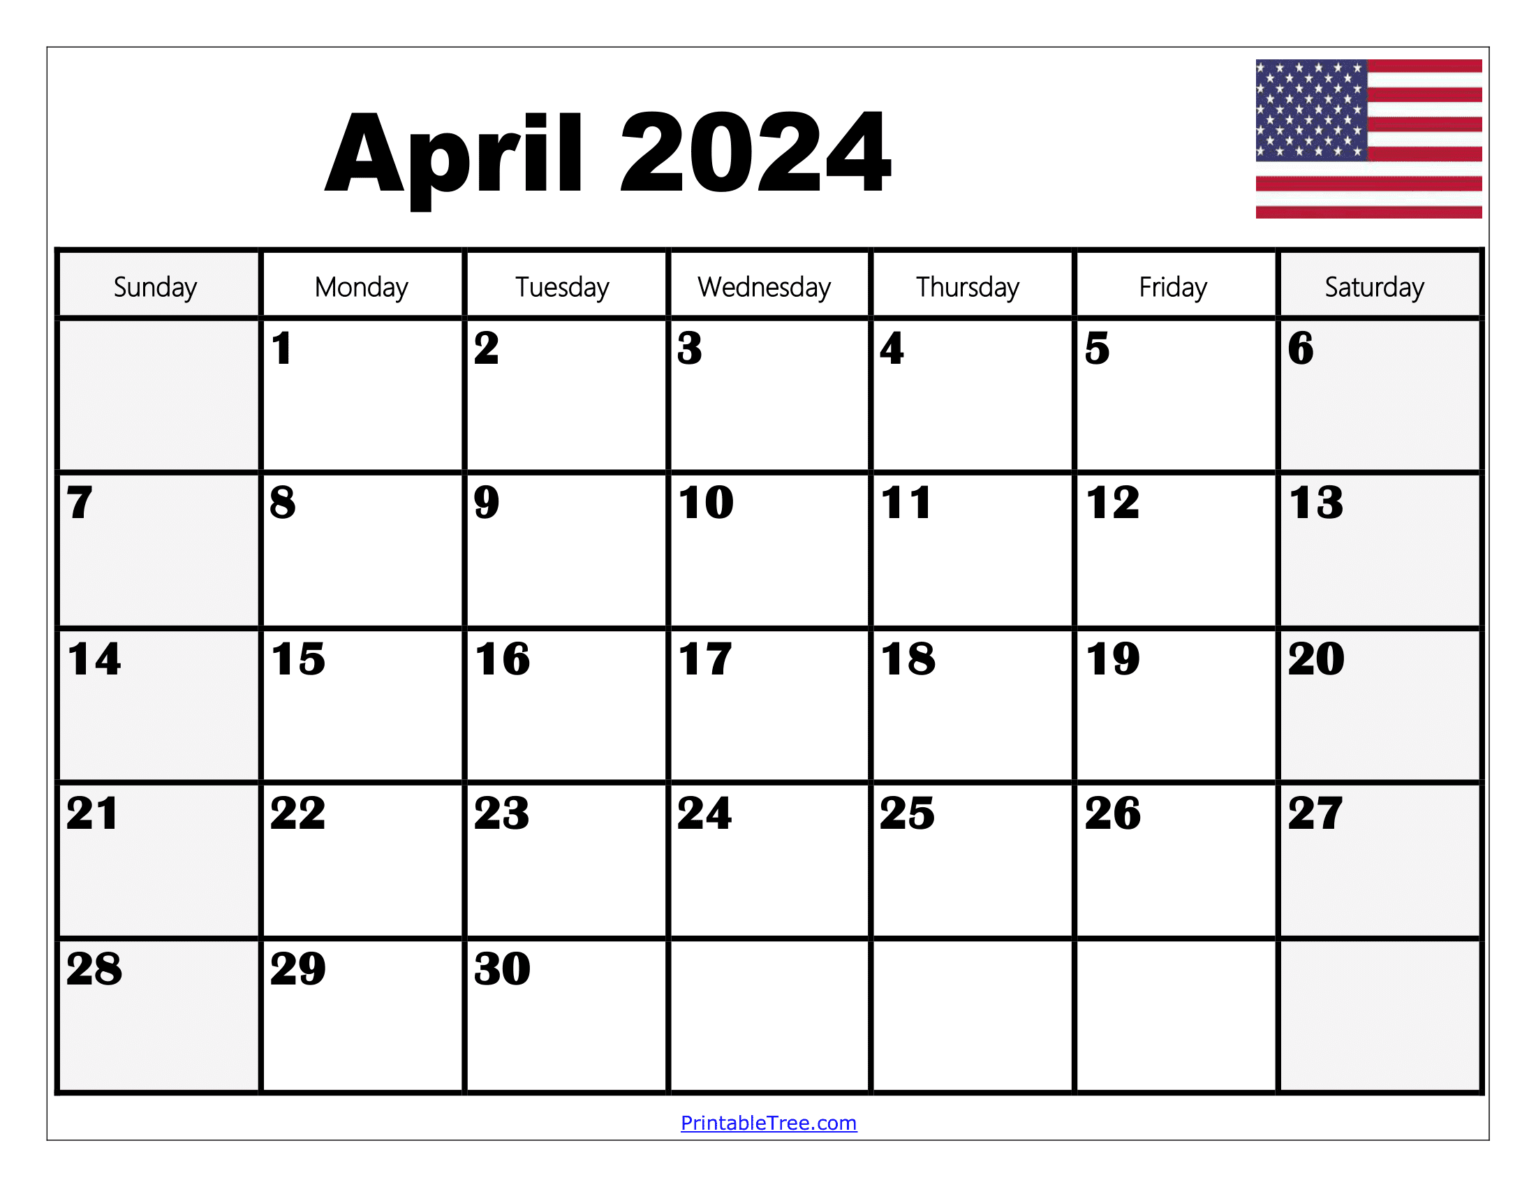 calendar-april-2024-in-word-best-awesome-list-of-january-2024